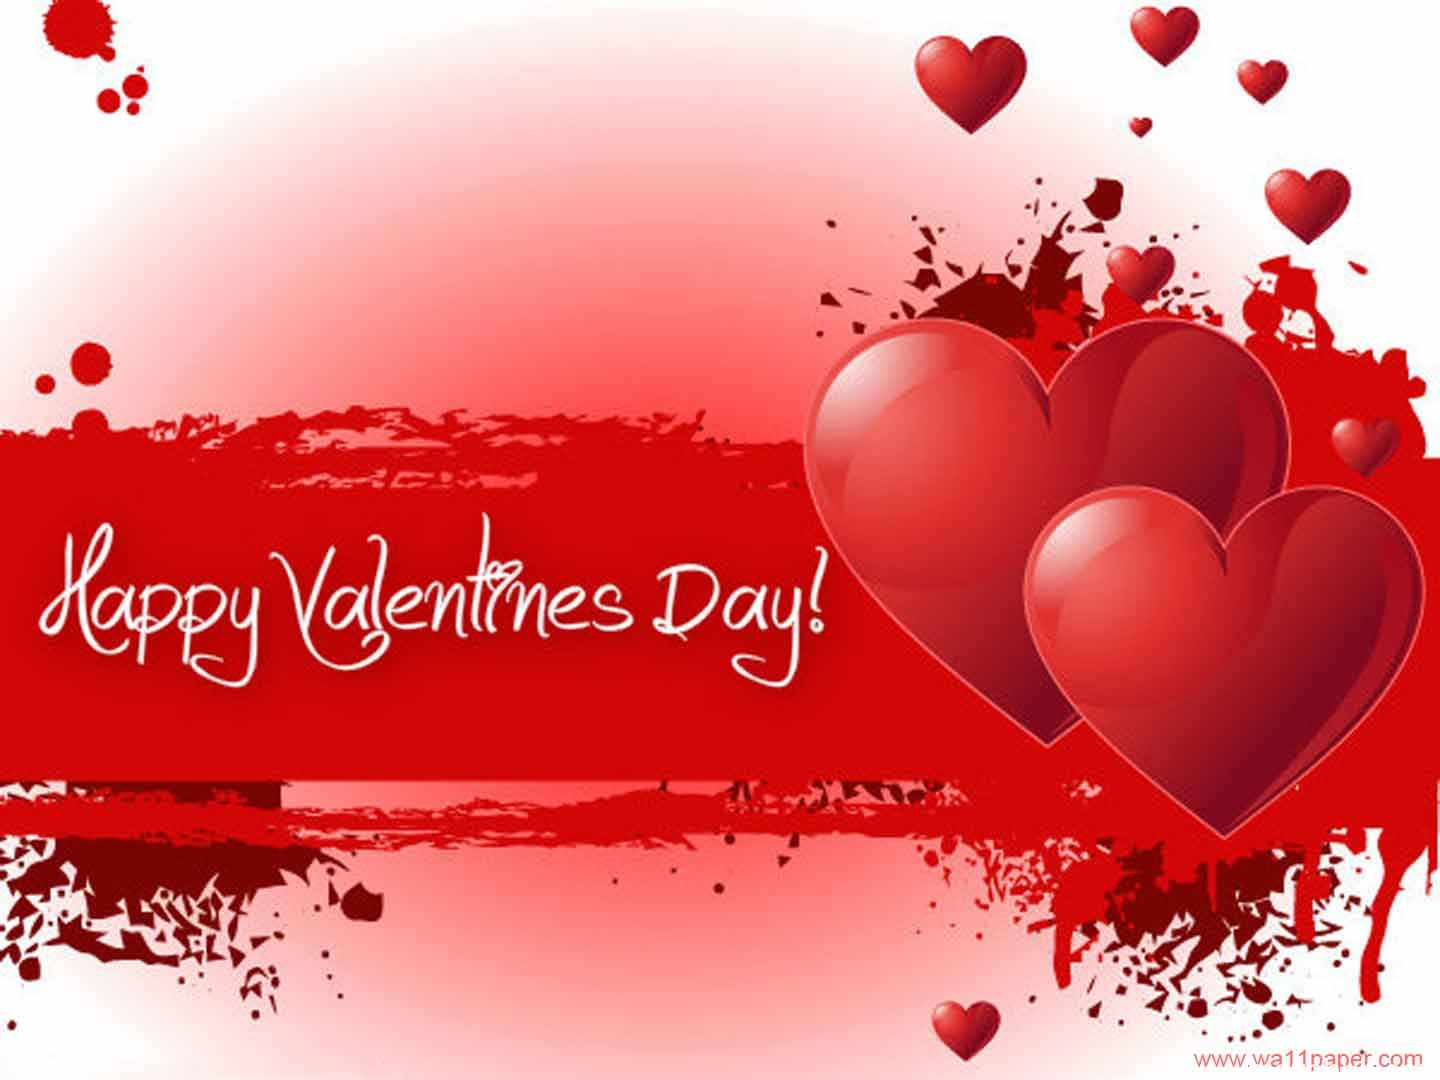 Valentine day Week List 2015 |Rose Day Propose Day Hug Day Kiss.